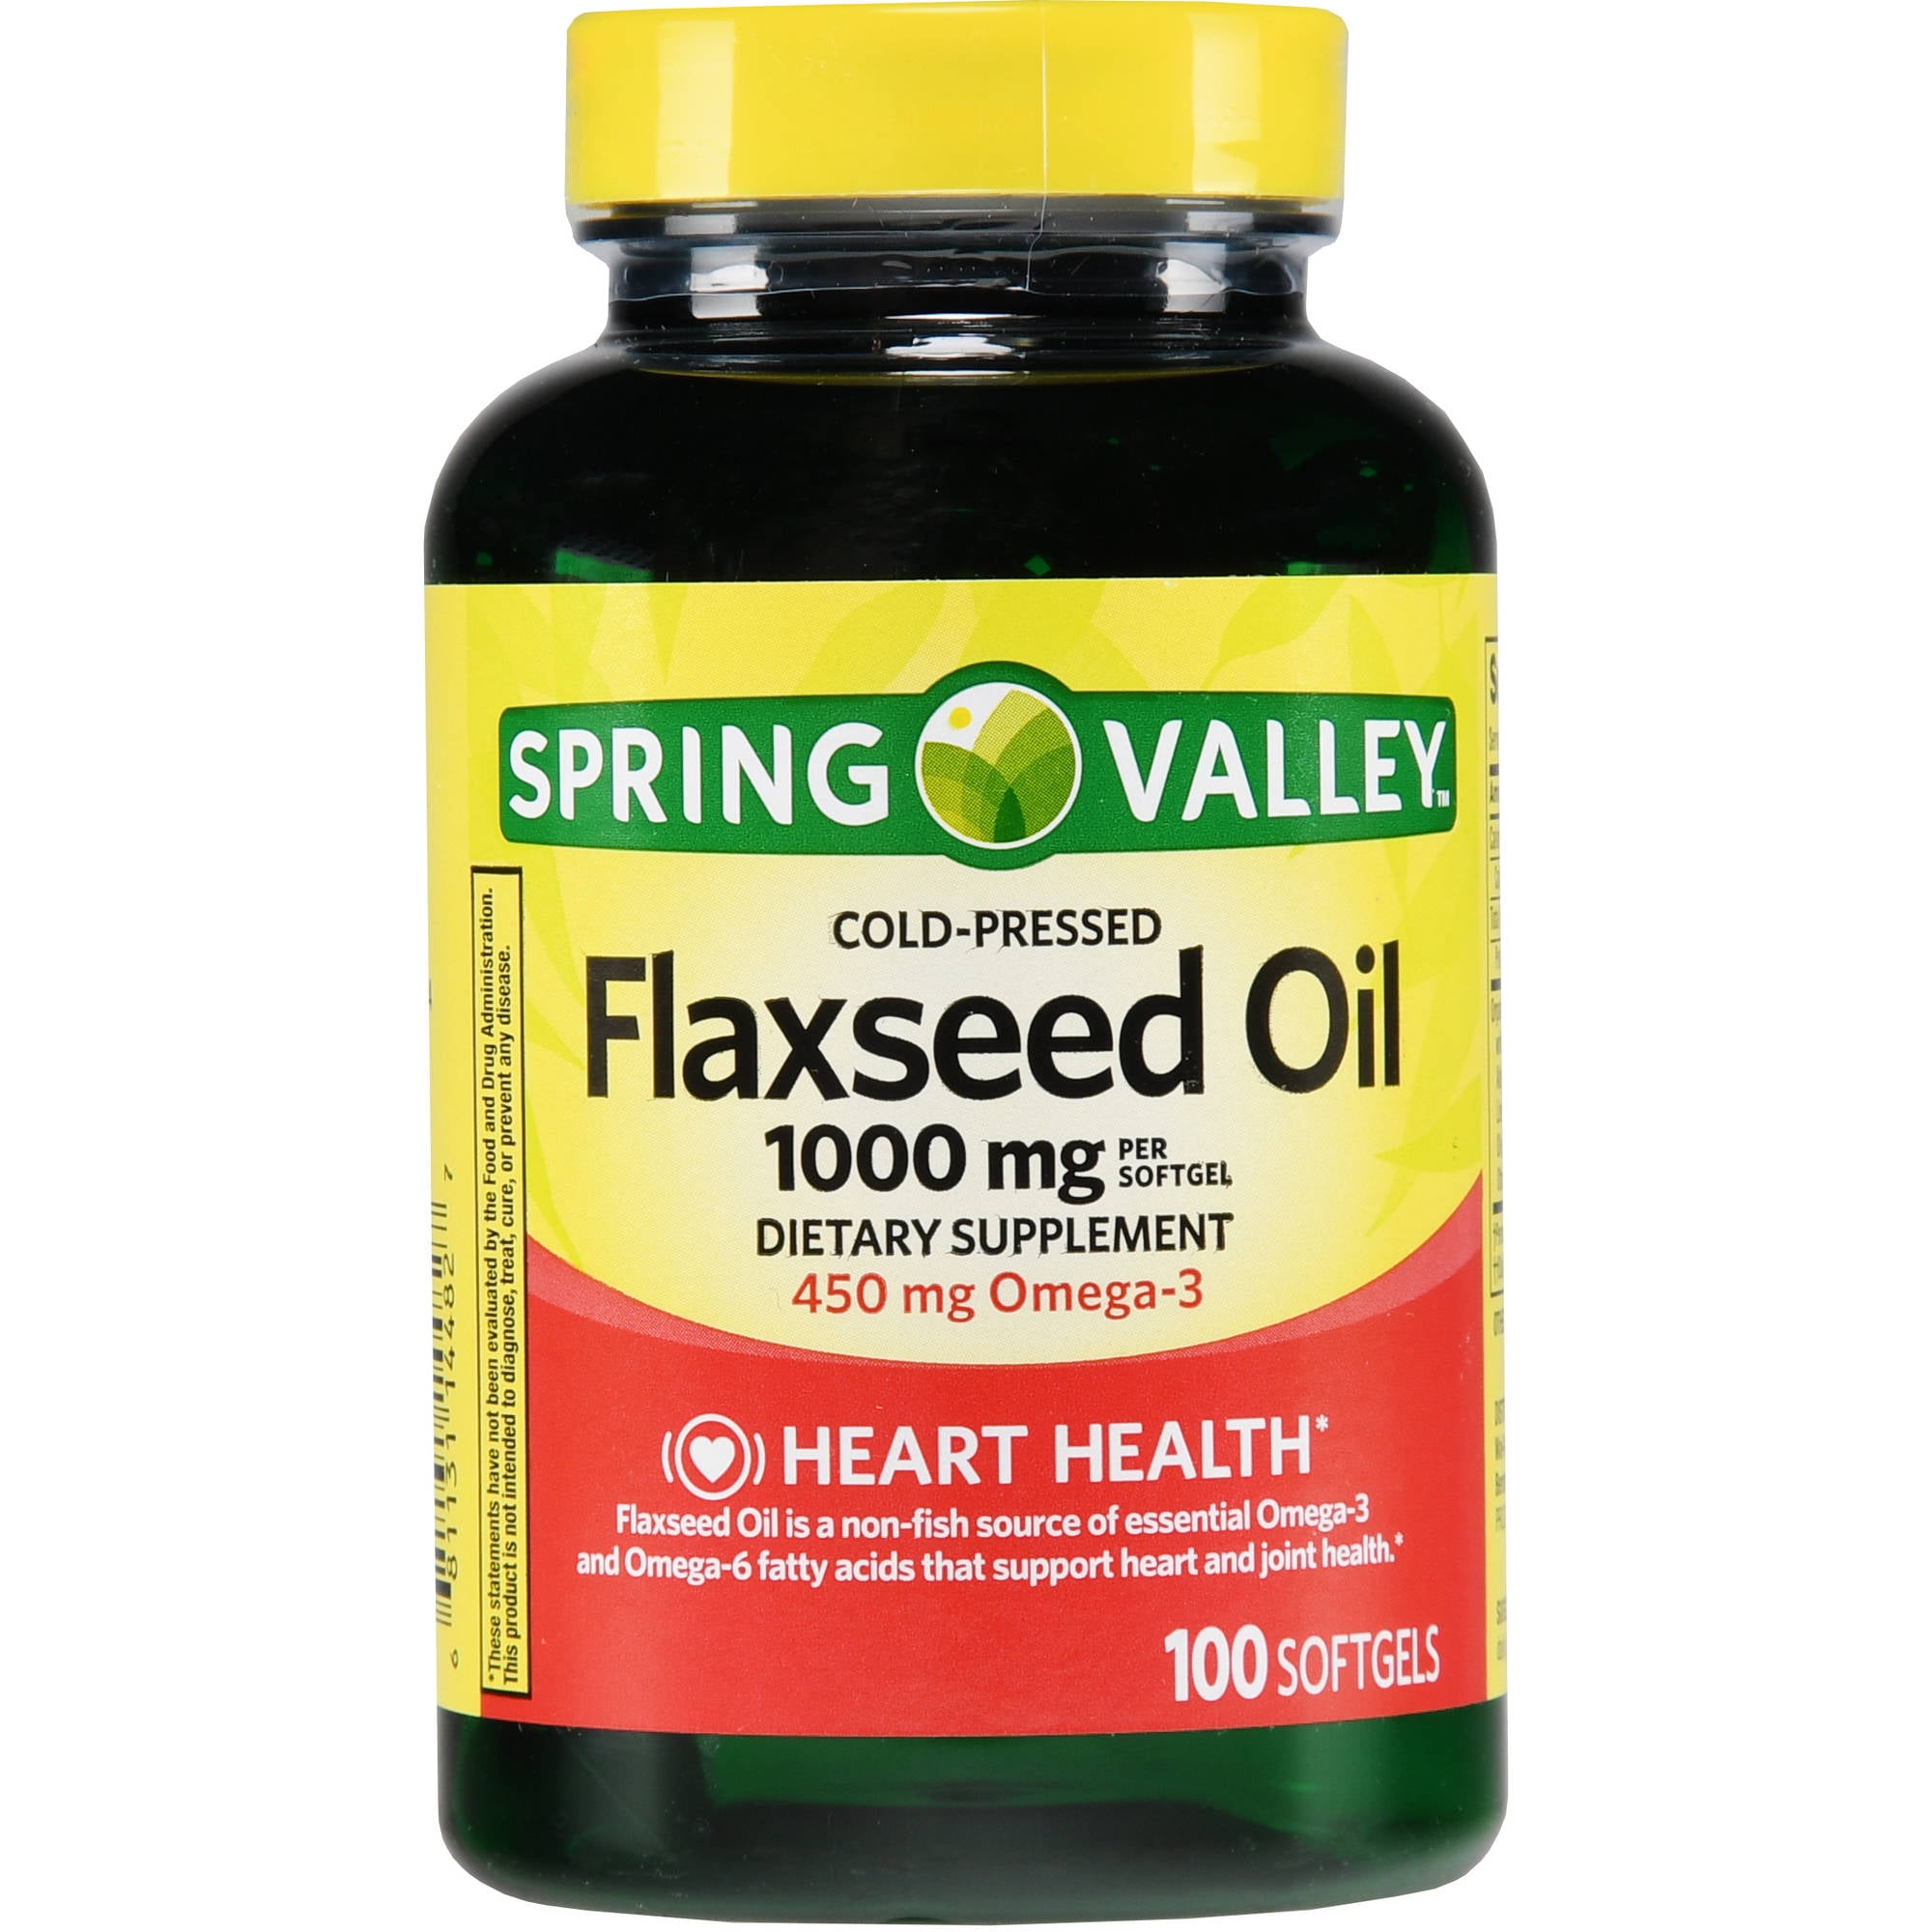 What recipes call for the use of flaxseed oil?